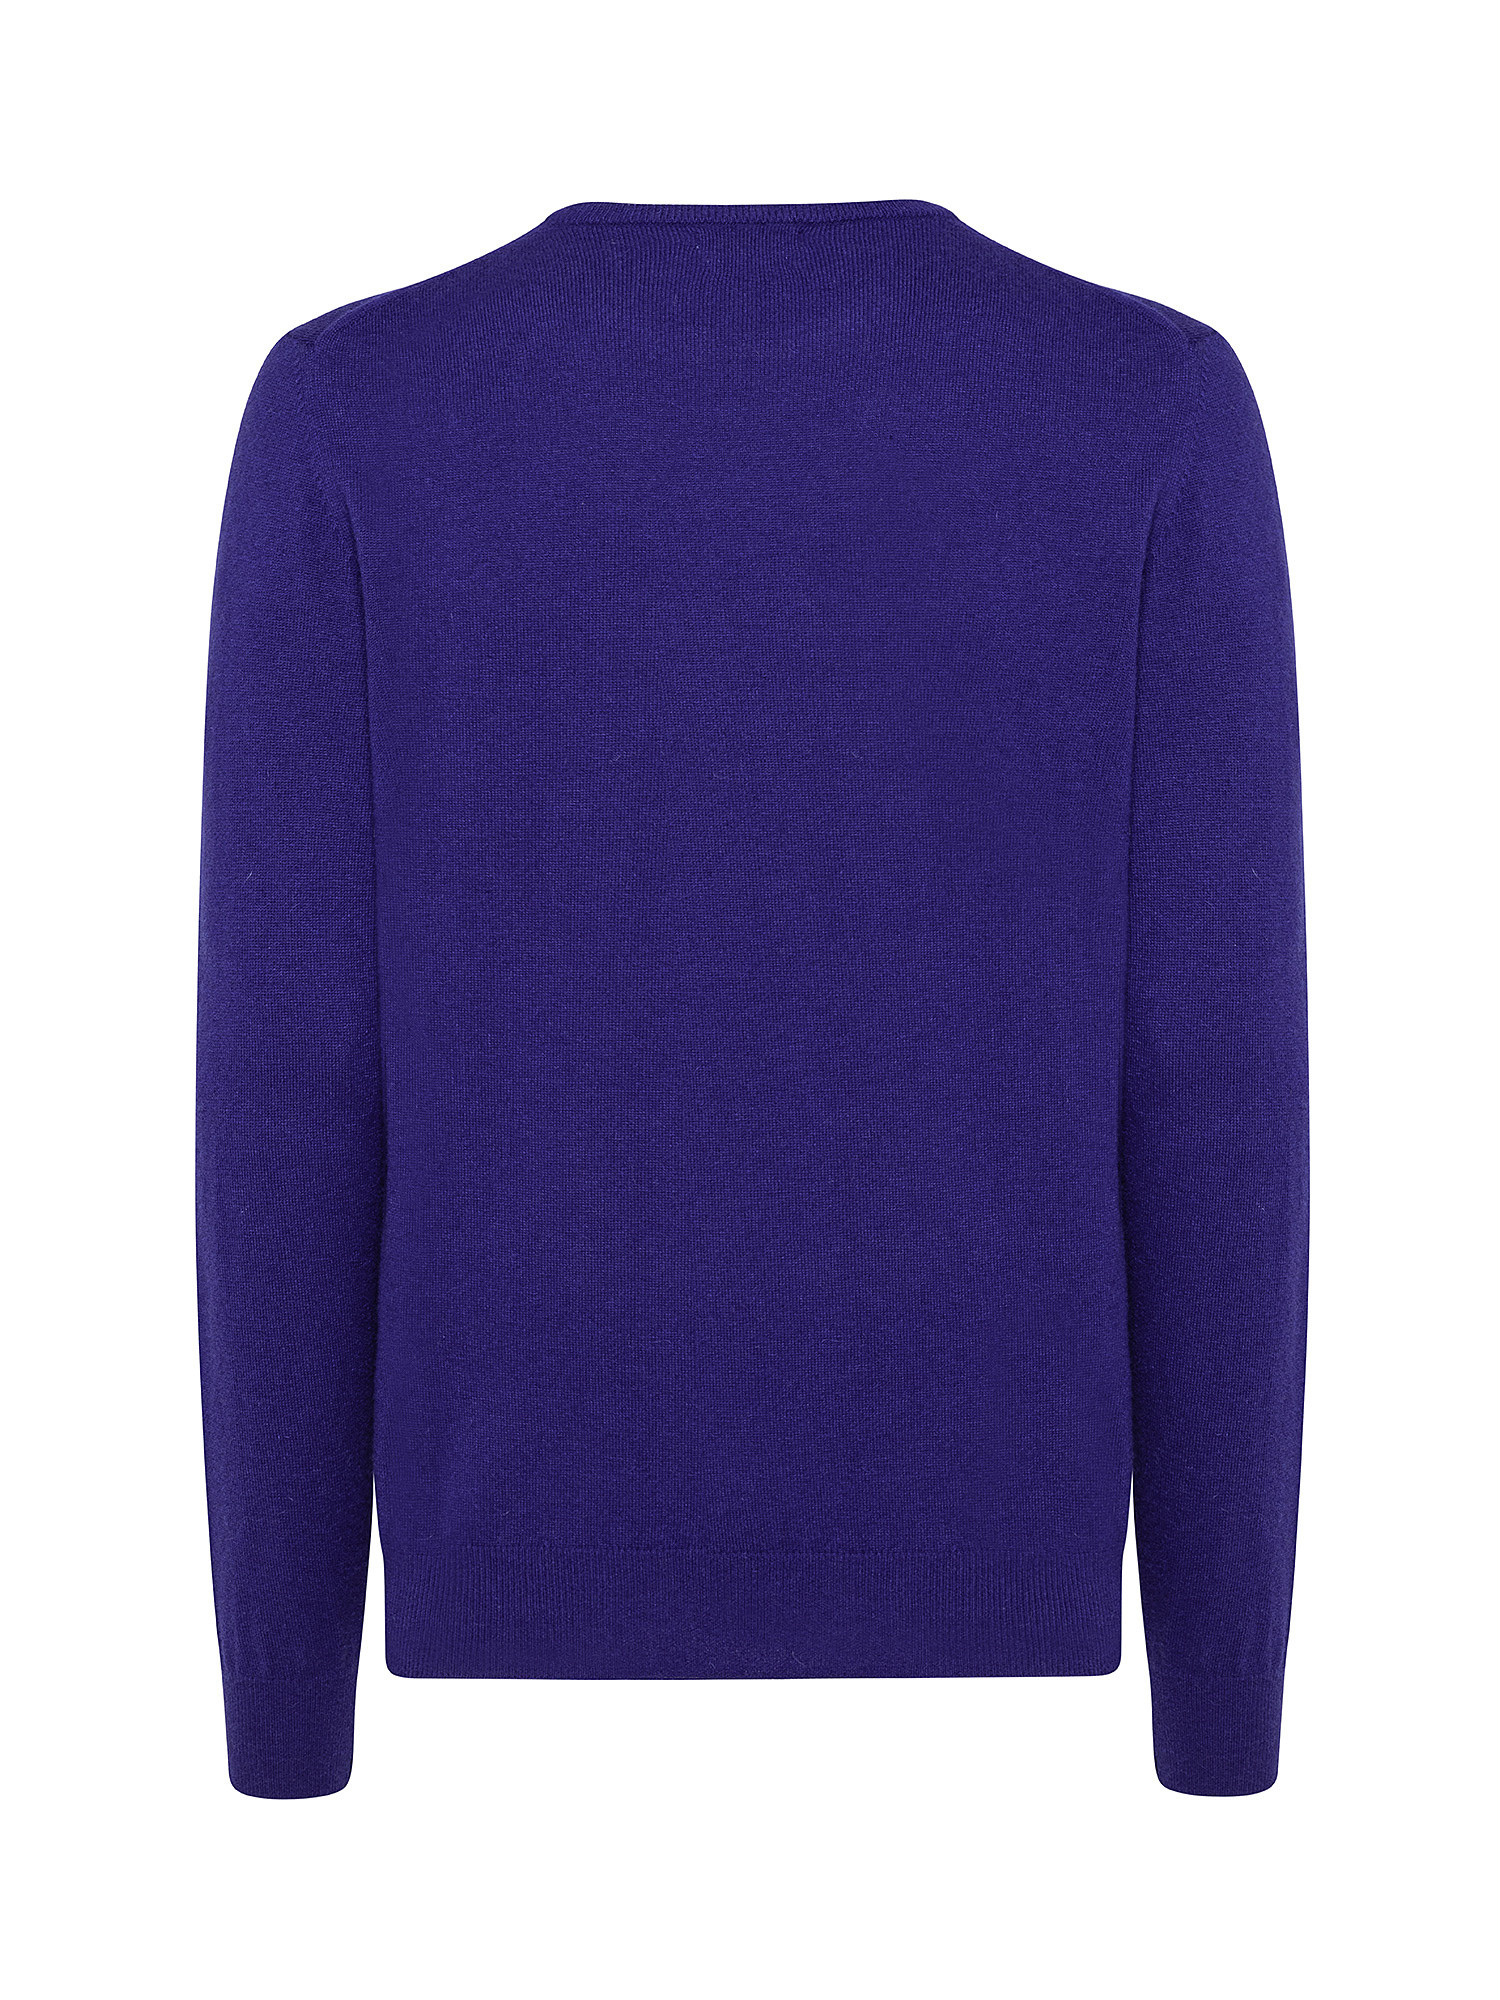 Cashmere Blend crewneck sweater with noble fibers, Royal Blue, large image number 1